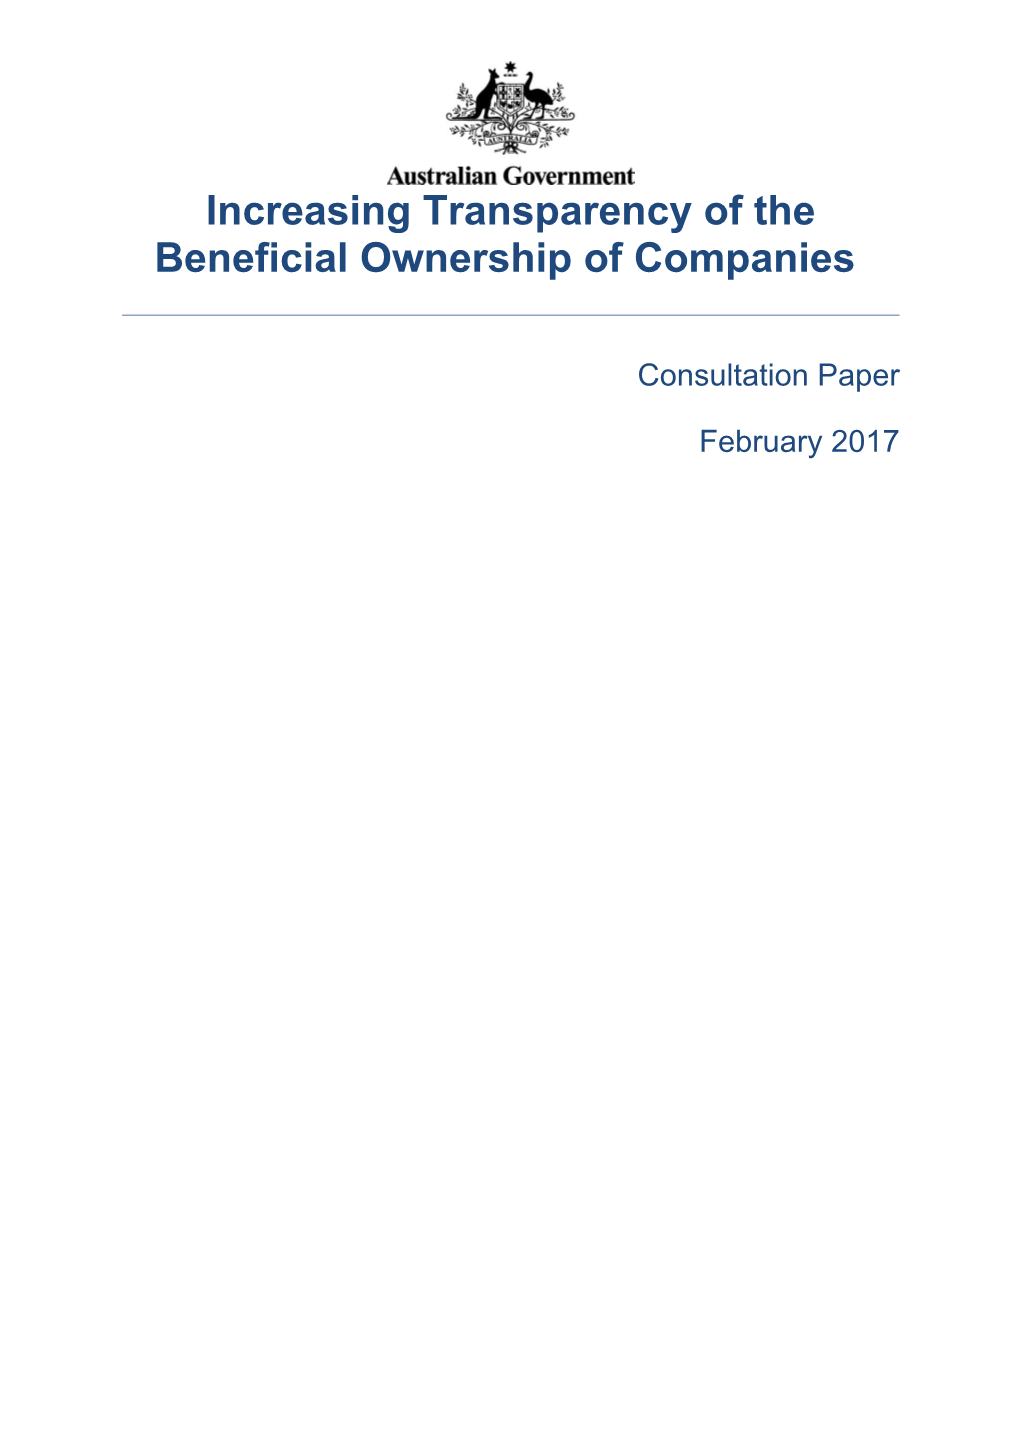 Consultation Paper - Increasing Transparency of the Beneficial Ownership of Companies